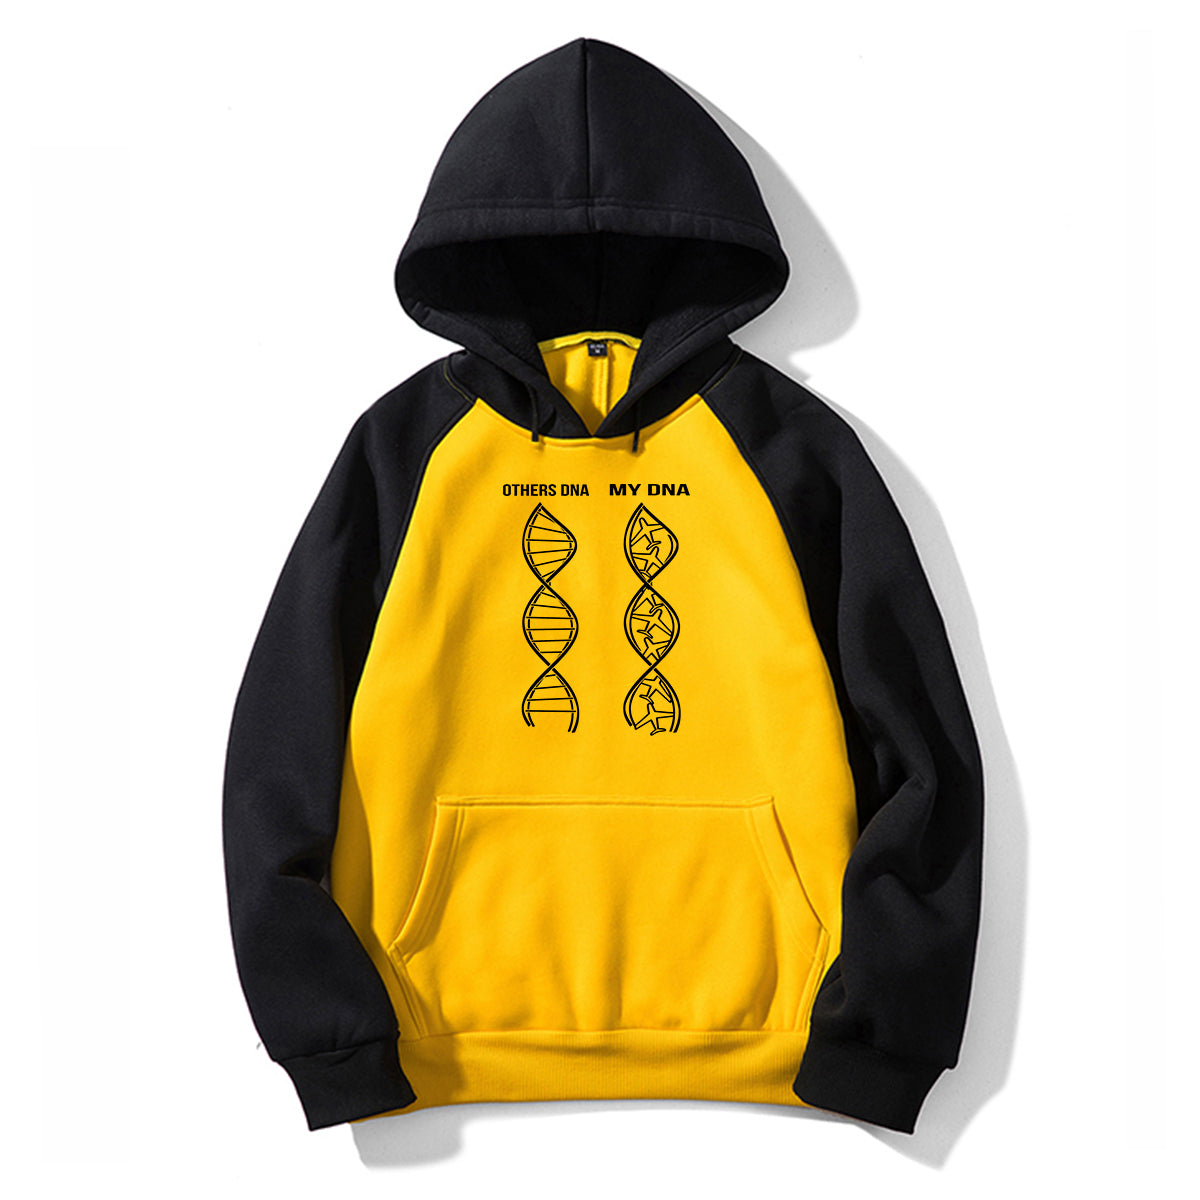 Aviation DNA Designed Colourful Hoodies